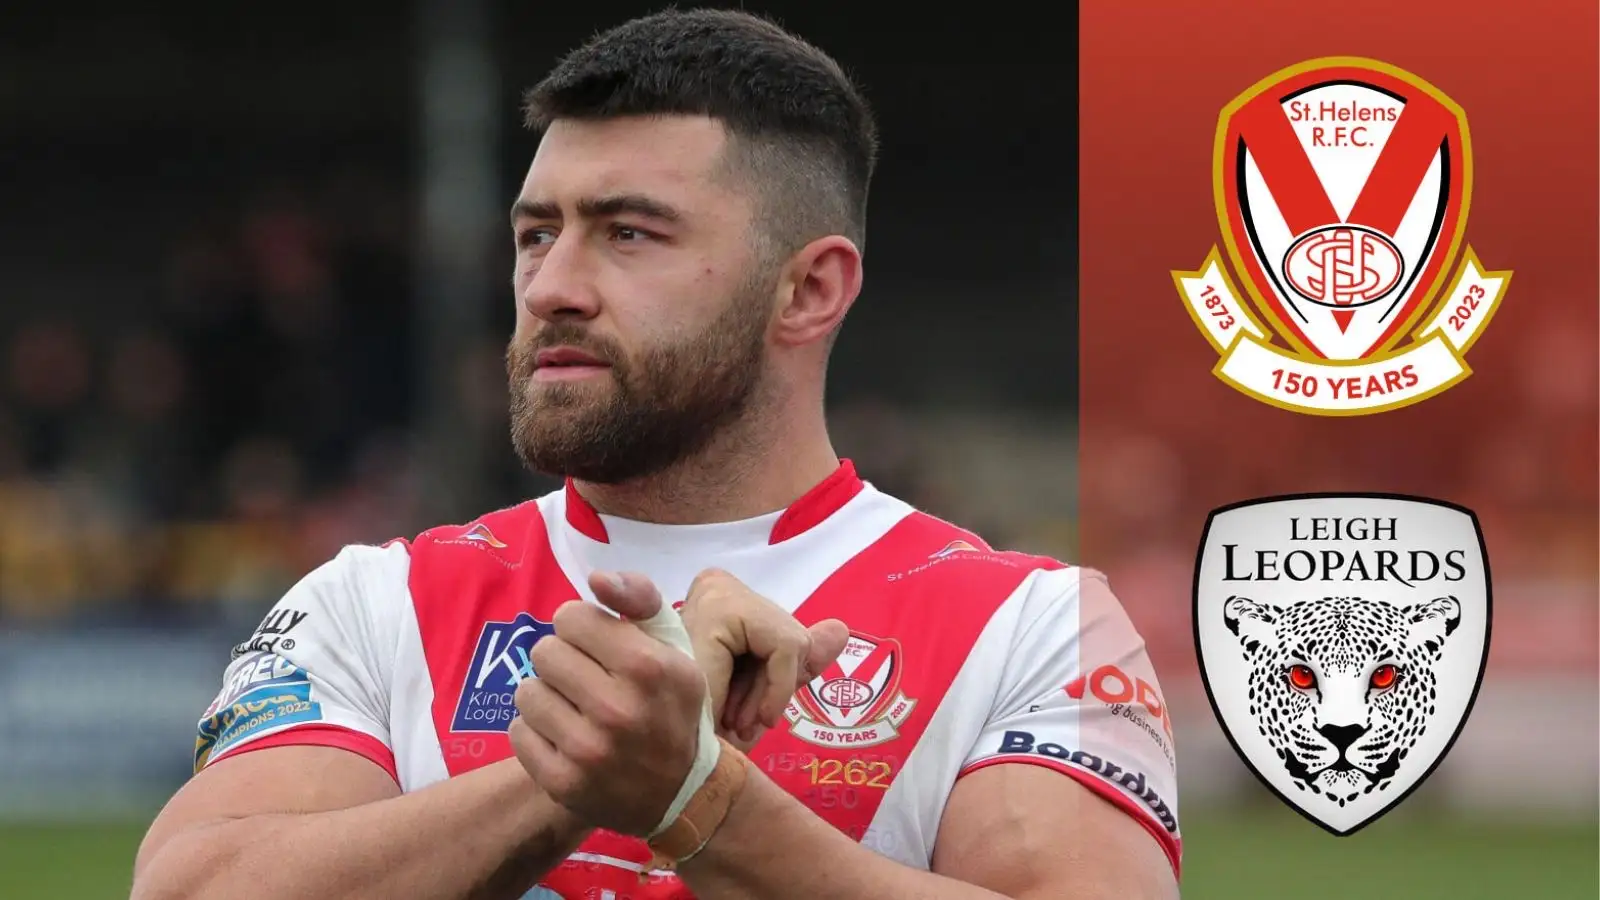 St Helens Coach Paul Wellens discusses why the club recalled Dan Norman from his loan at Leigh Leopards